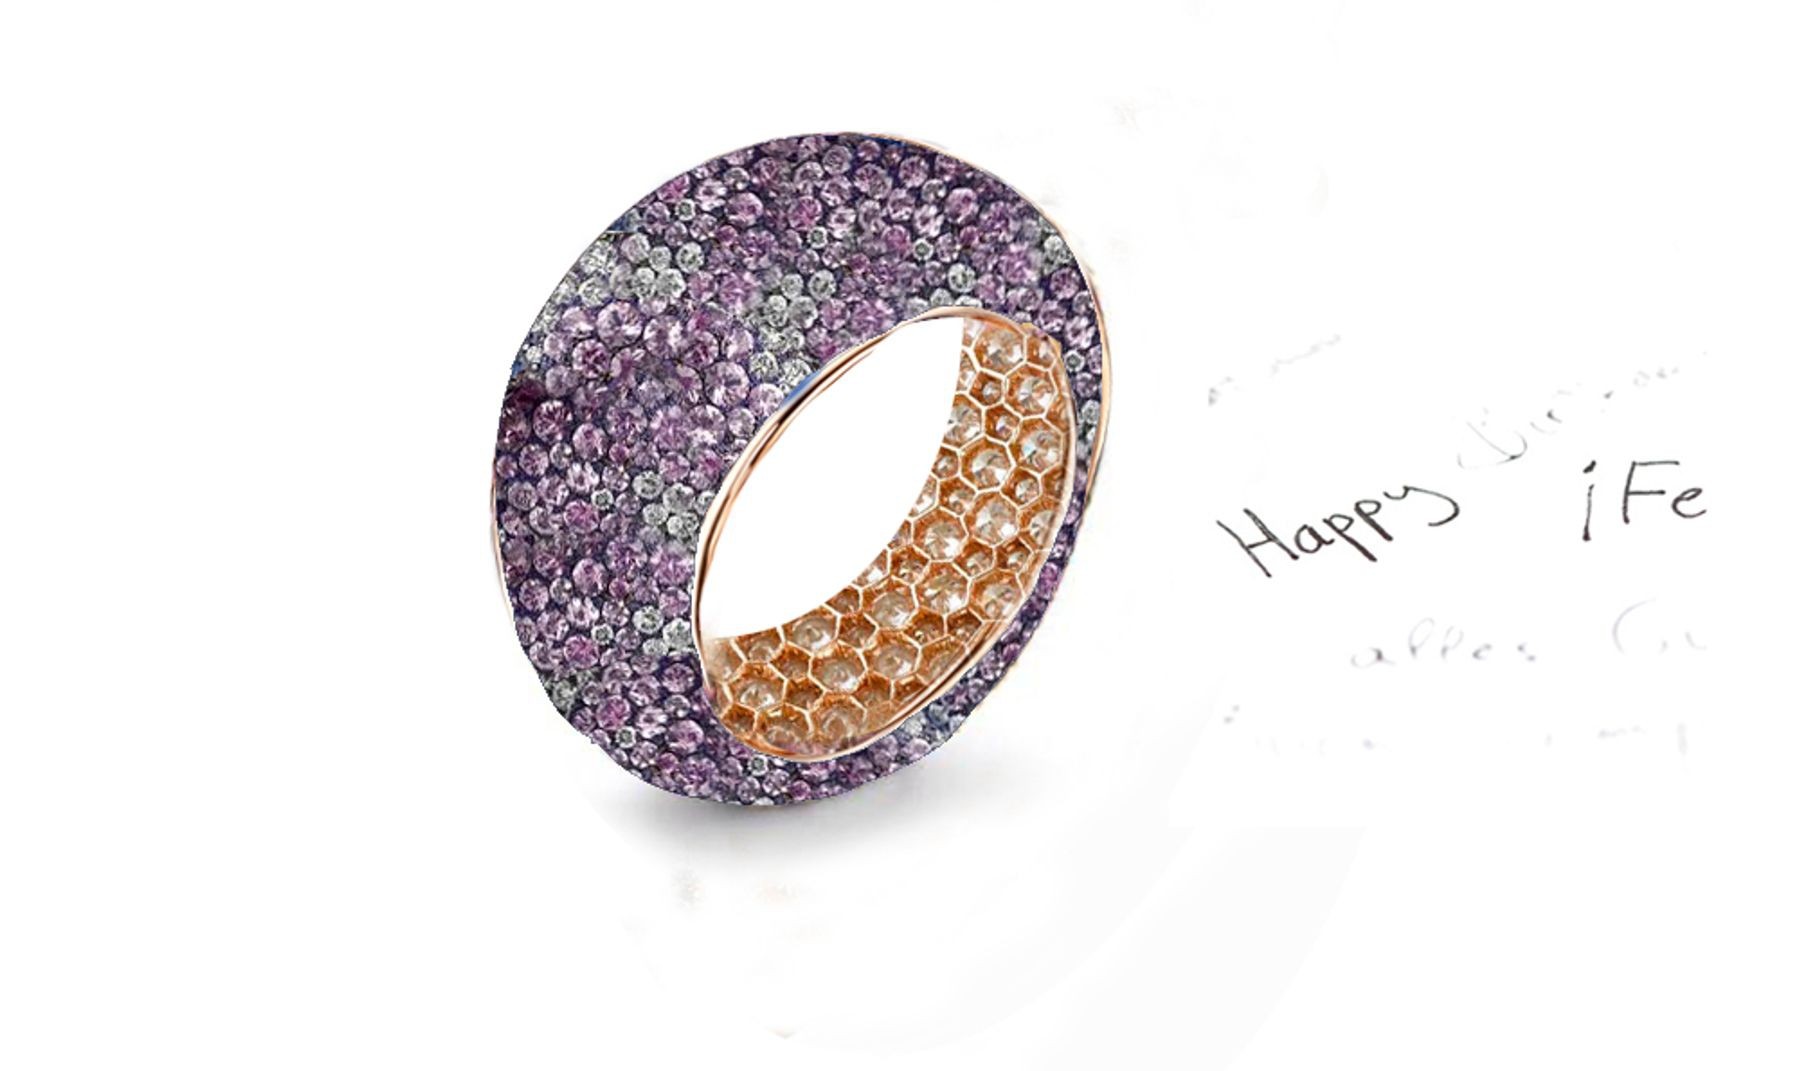 A Beautiful Collection of Eternity Rings Featuring Diamonds & Rubies, Emeralds & Sapphires